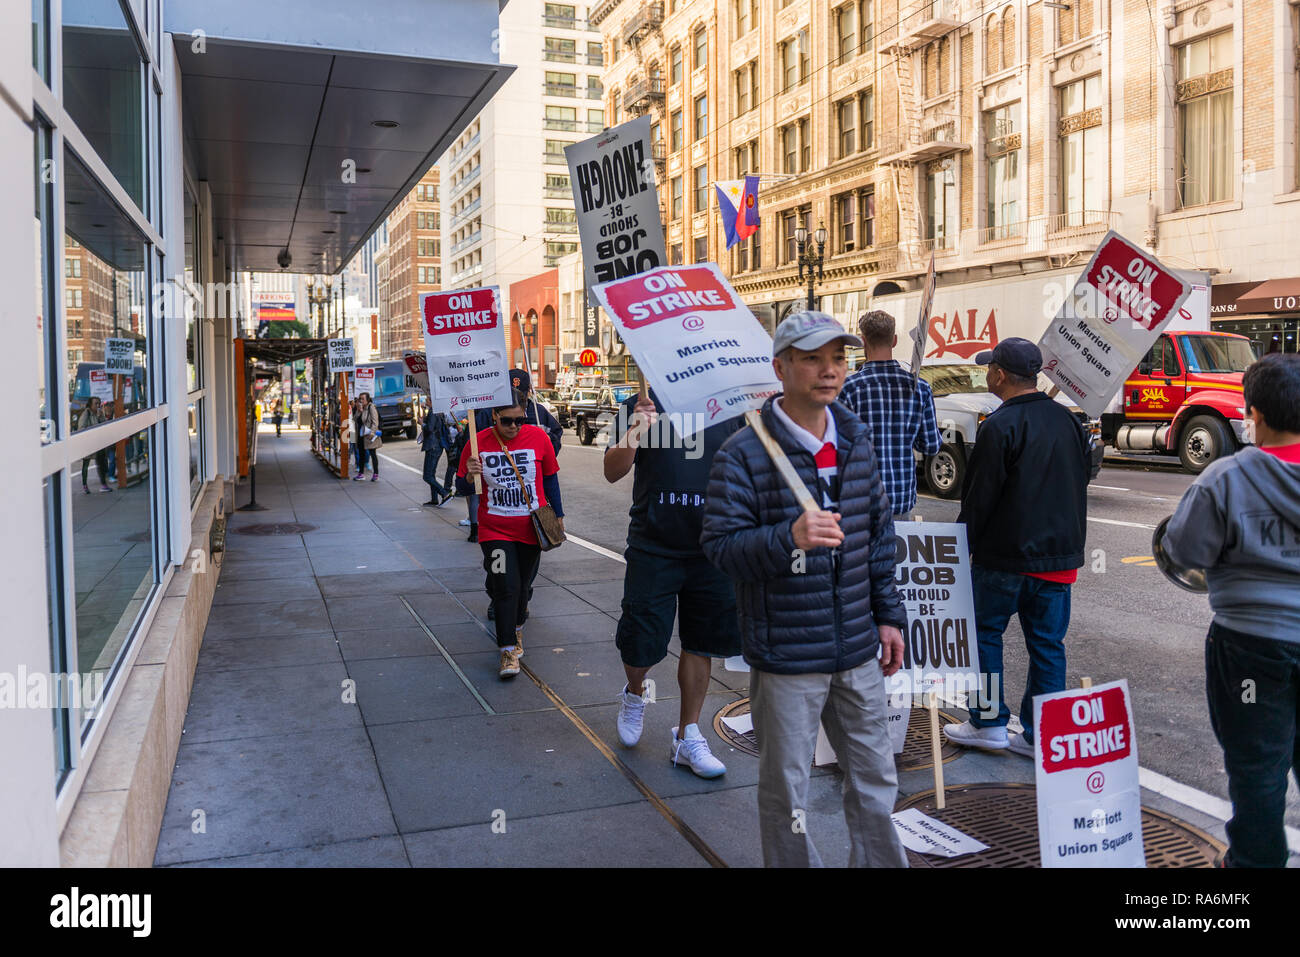 Workers strike at the entrance of the Marriott Union Square Hotel in San Francisco, California, USA Stock Photo